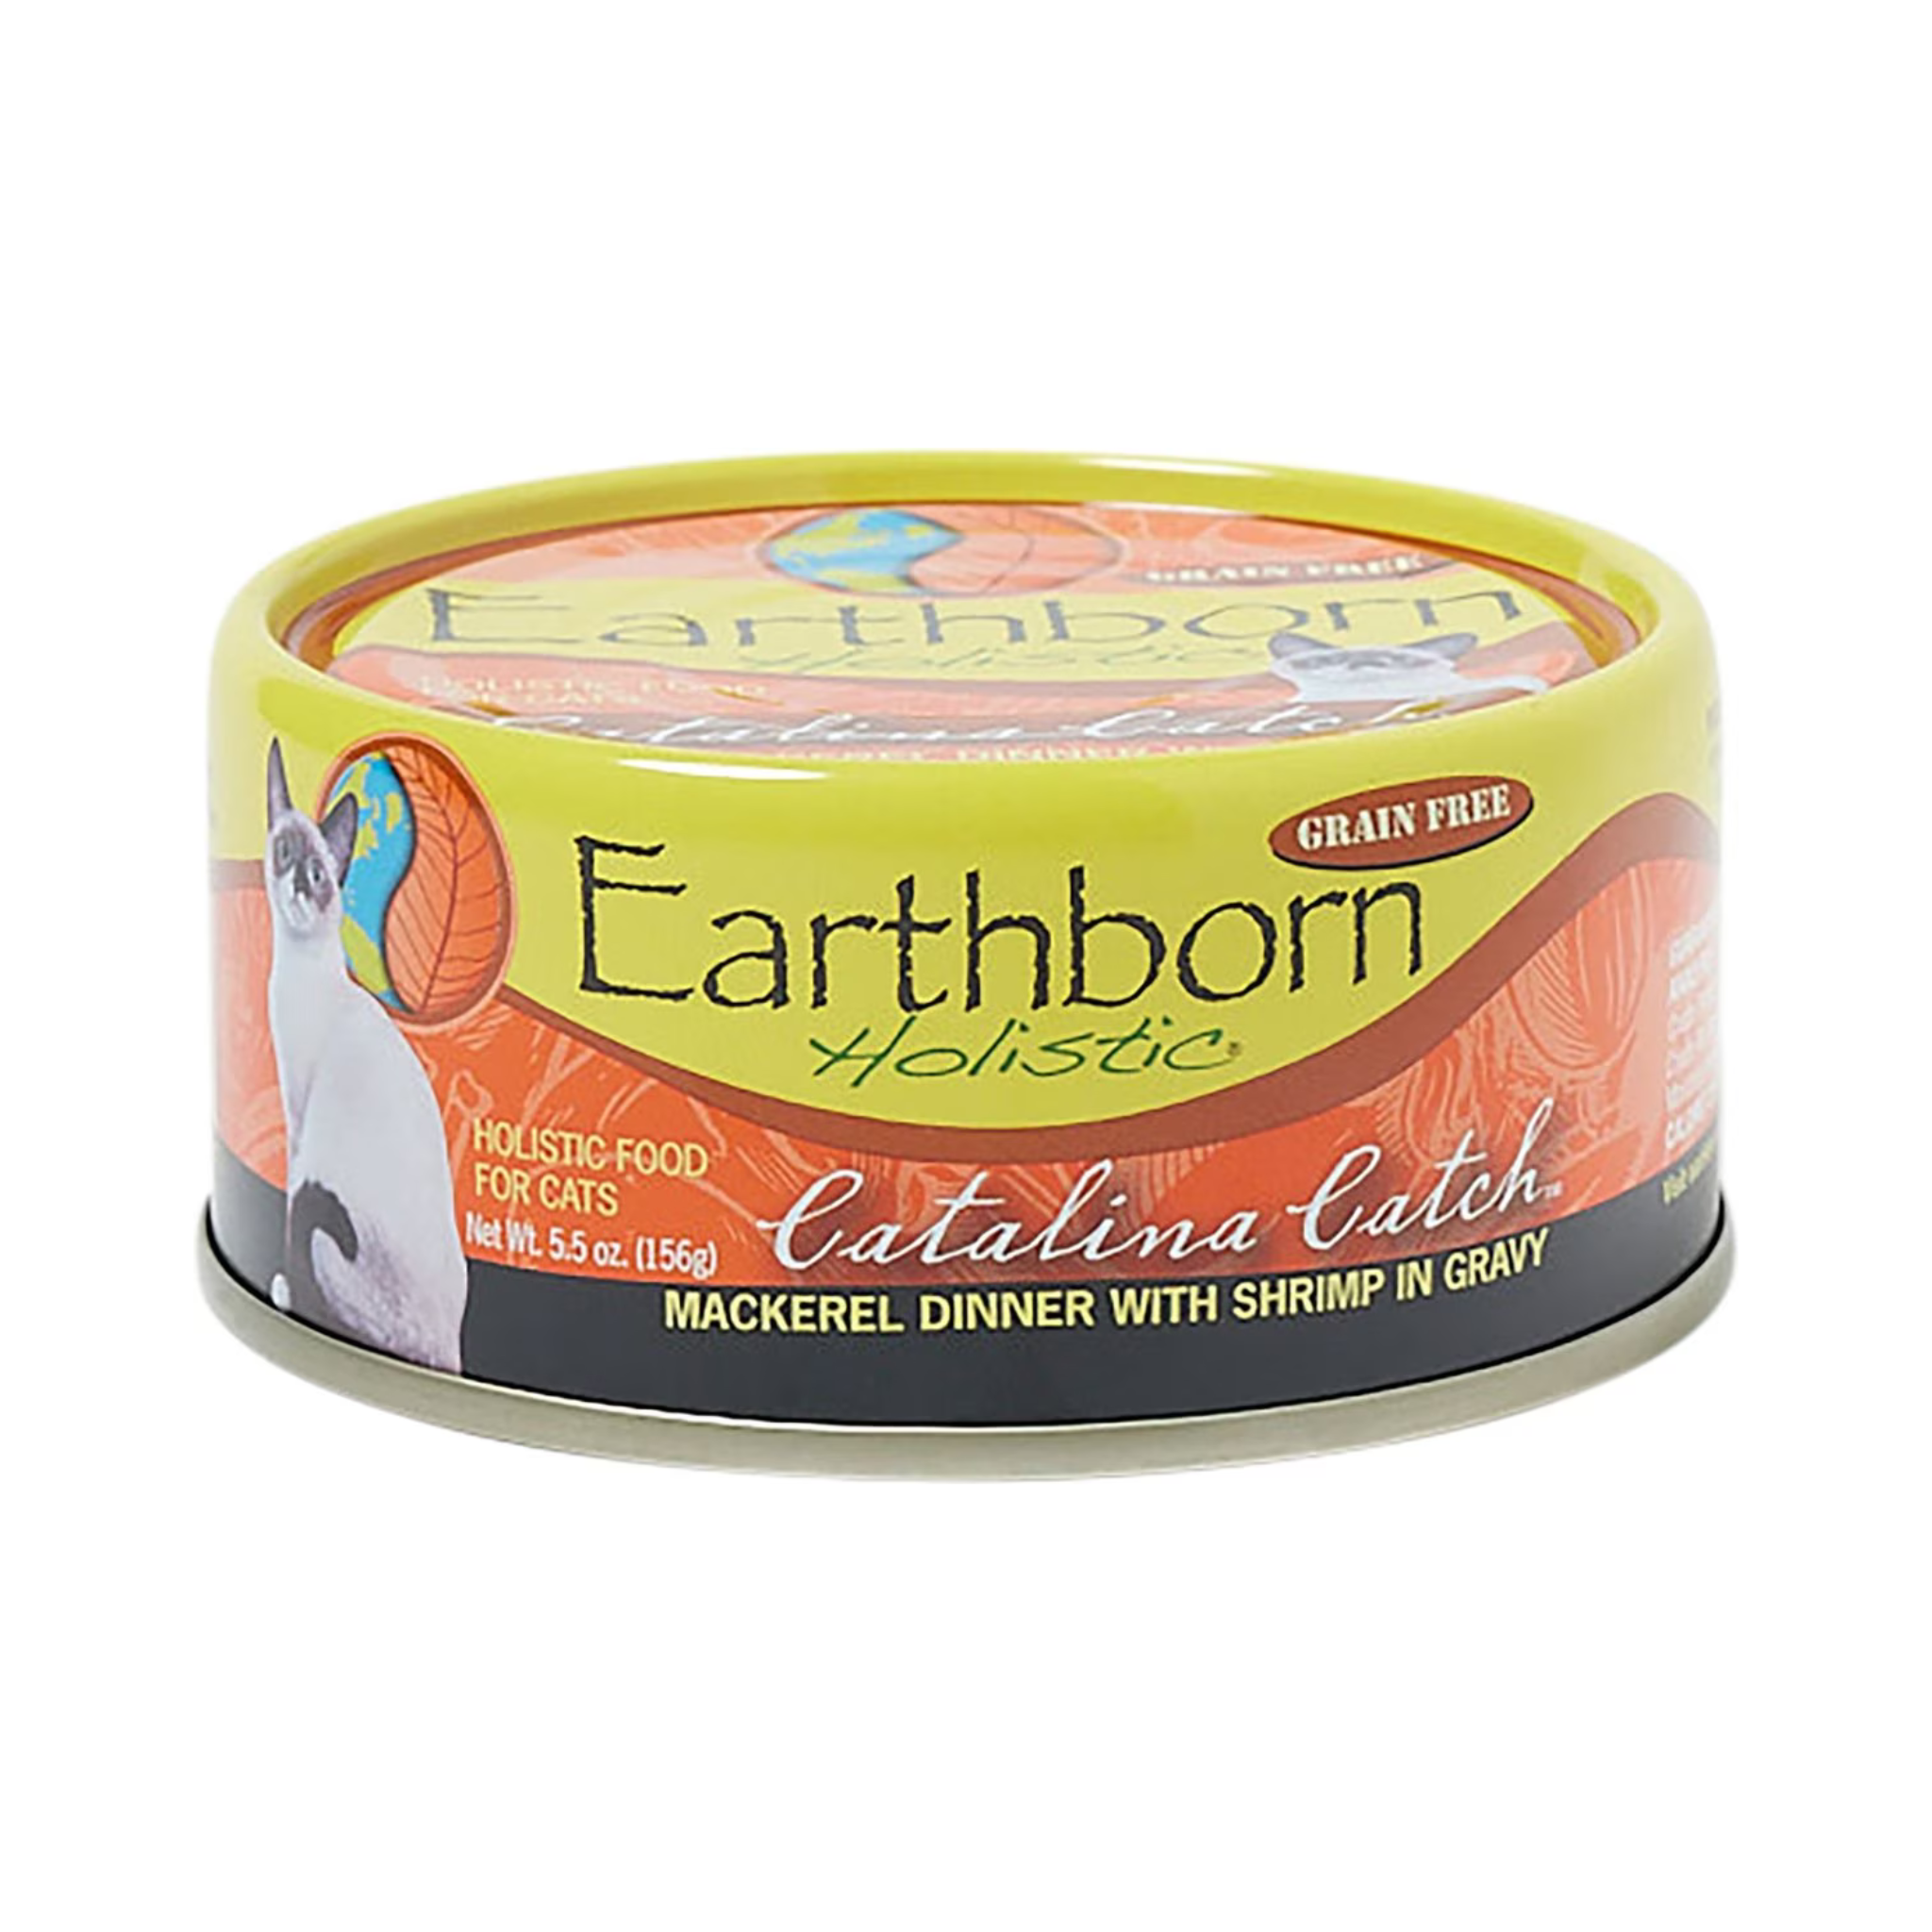 Earthborn Catalina Catch Cat Canned